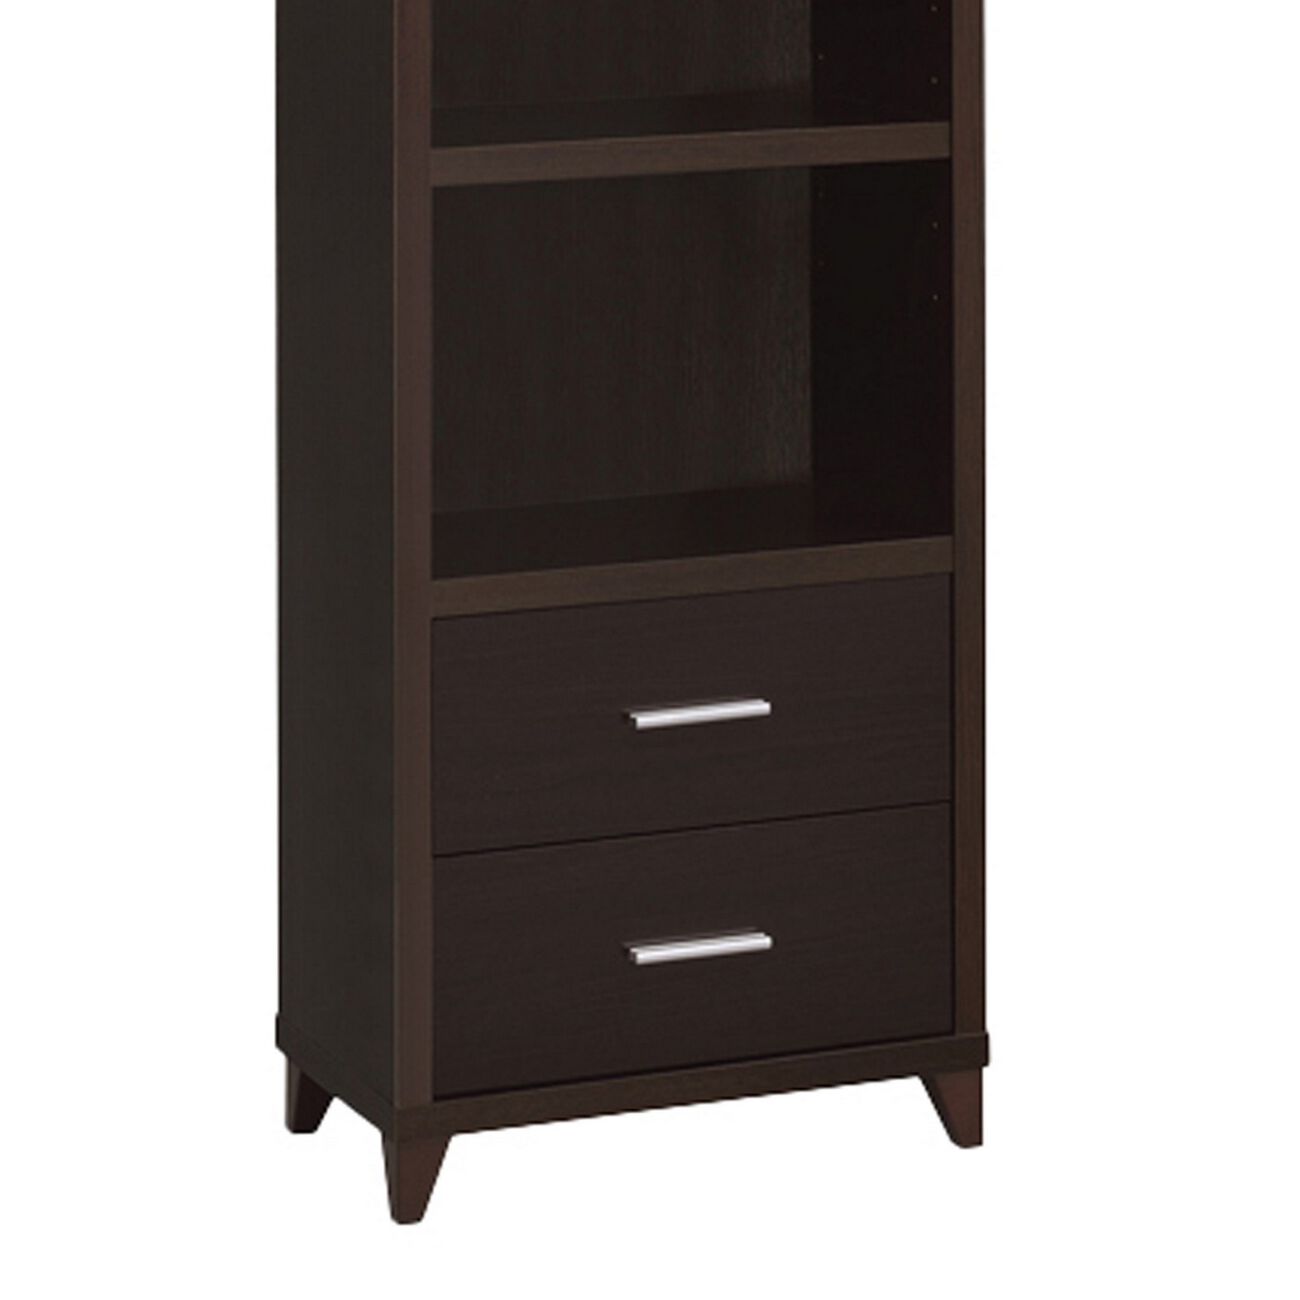 3 Shelf Wooden Media Tower with 2 Drawers, Dark Brown